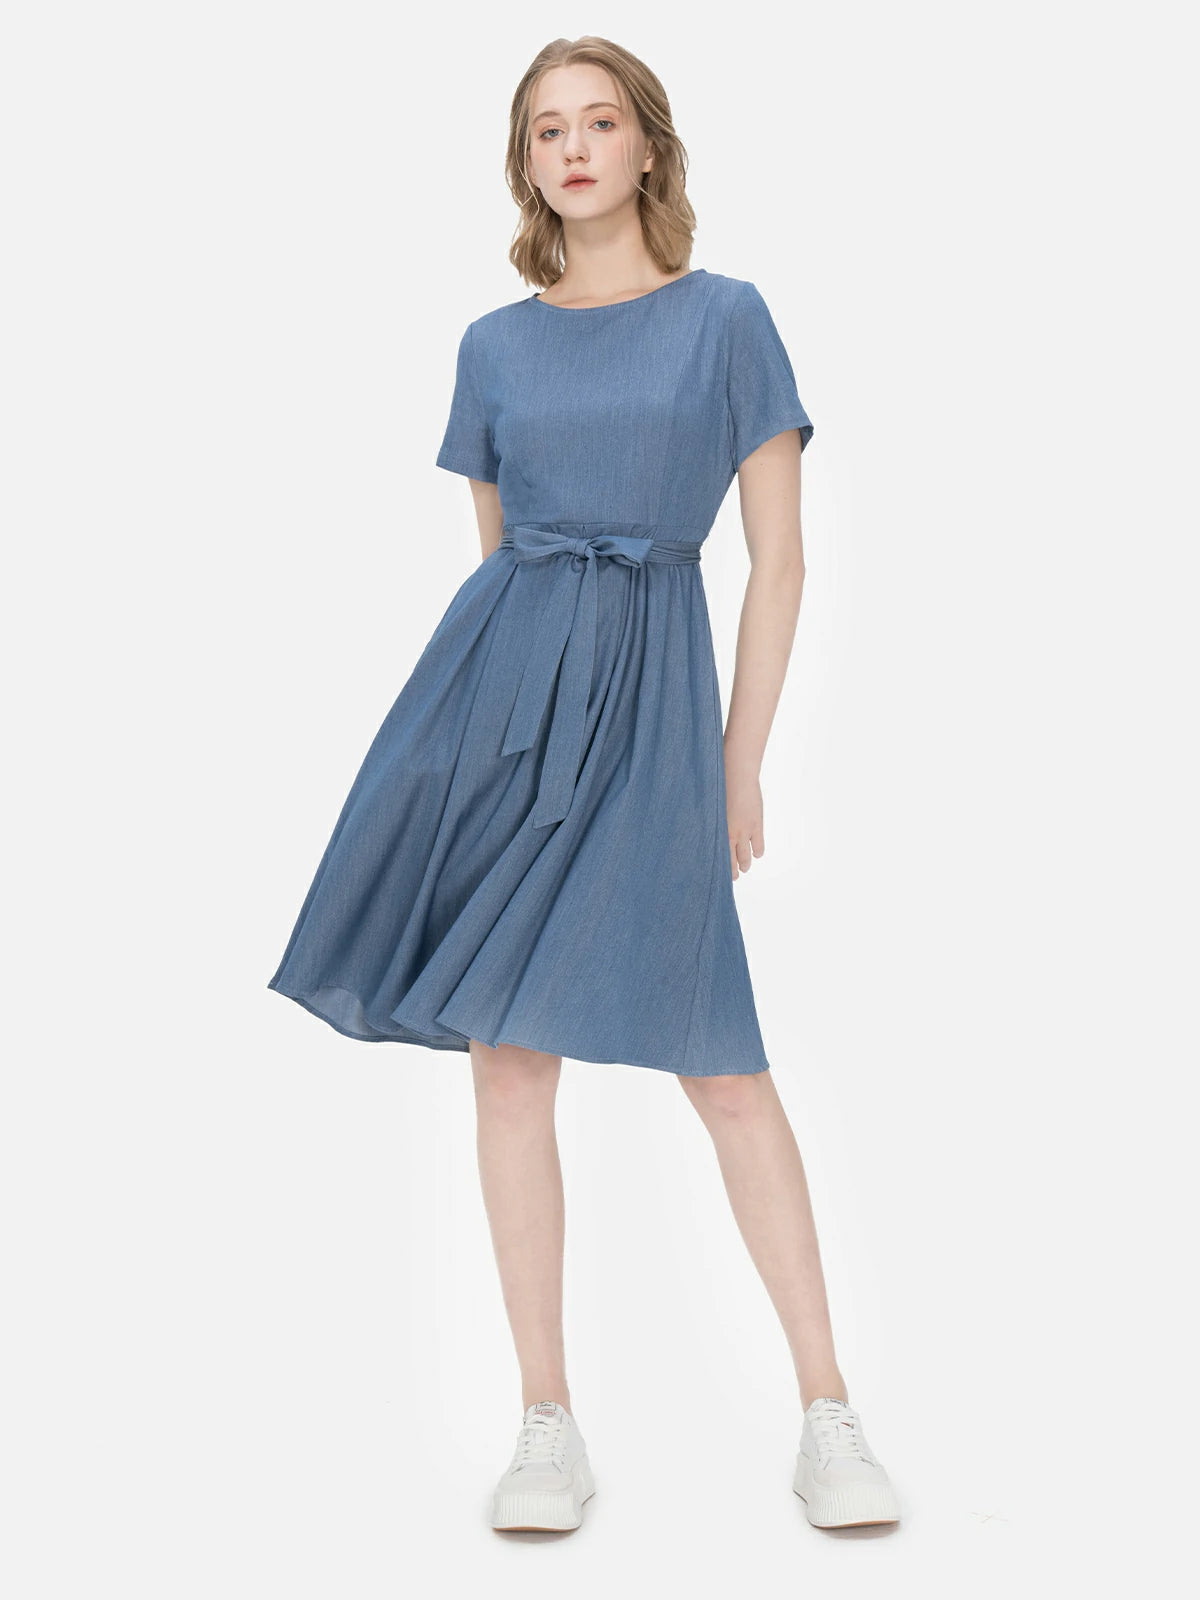 Effortlessly stylish midi dress with tie-waist, ideal for everyday wear